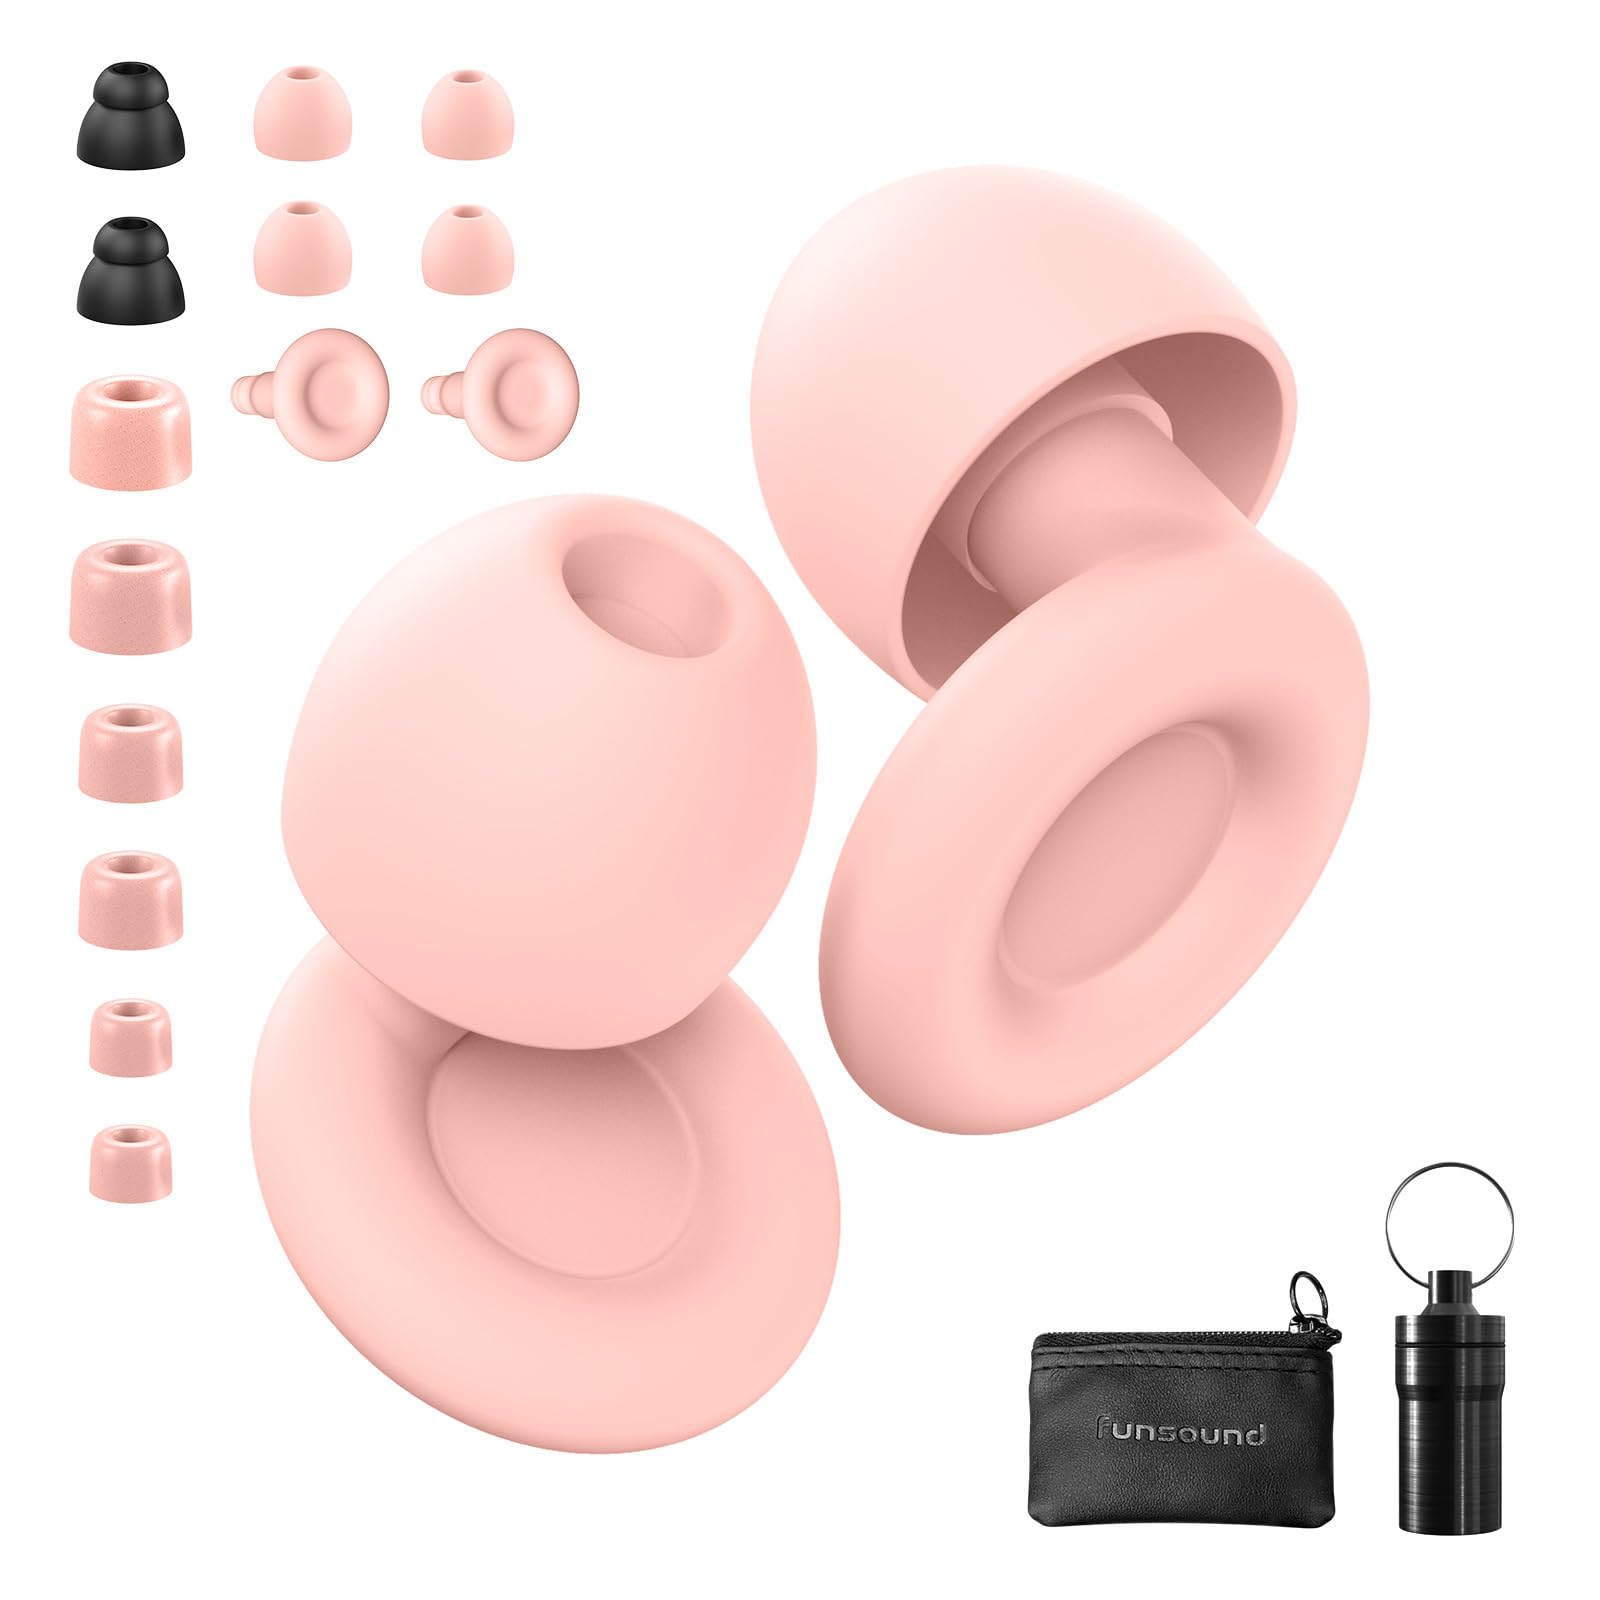 Ear Plugs for Sleeping Noise Reduction Reuseable, Concerts, Focus, Travel, Work, High Fidelity – 7 Pairs Eartips – Flexible Soft-Touch – NRR of 24 and 27 dB Noise Cancelling (Pink)